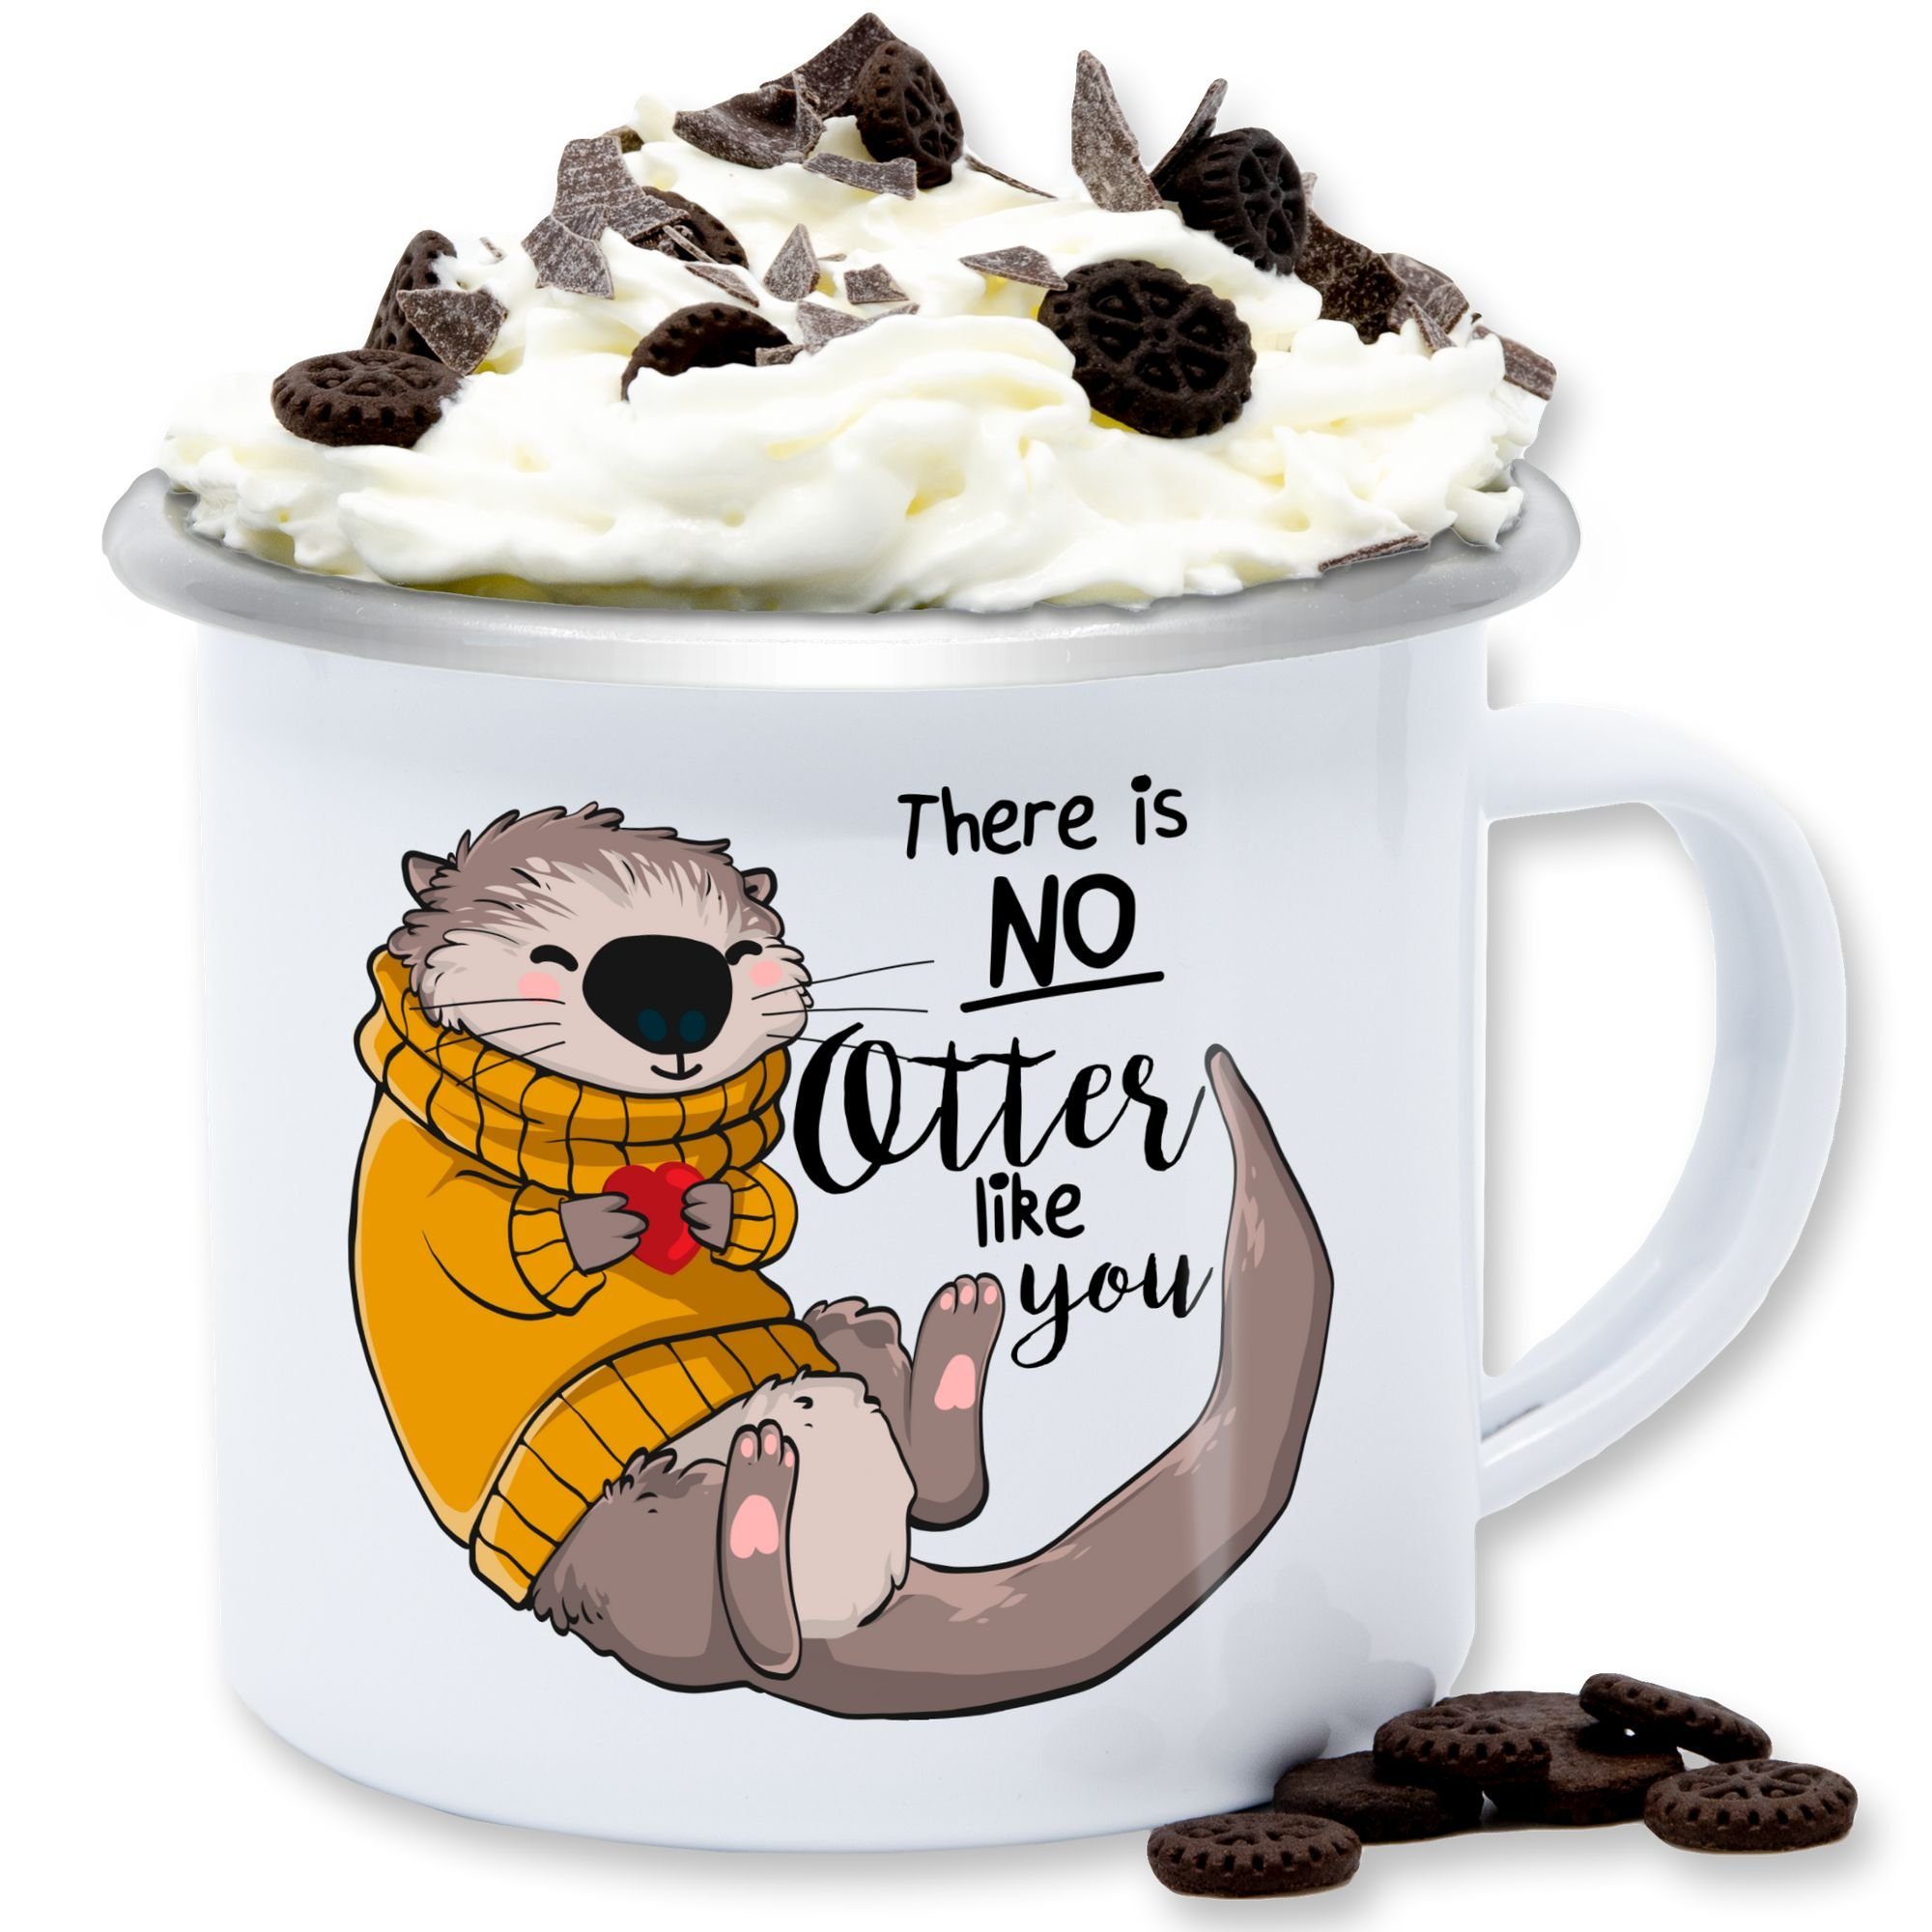 Silber you, Shirtracer is Sprüche Otter Statement Stahlblech, There 3 no Tasse like Weiß